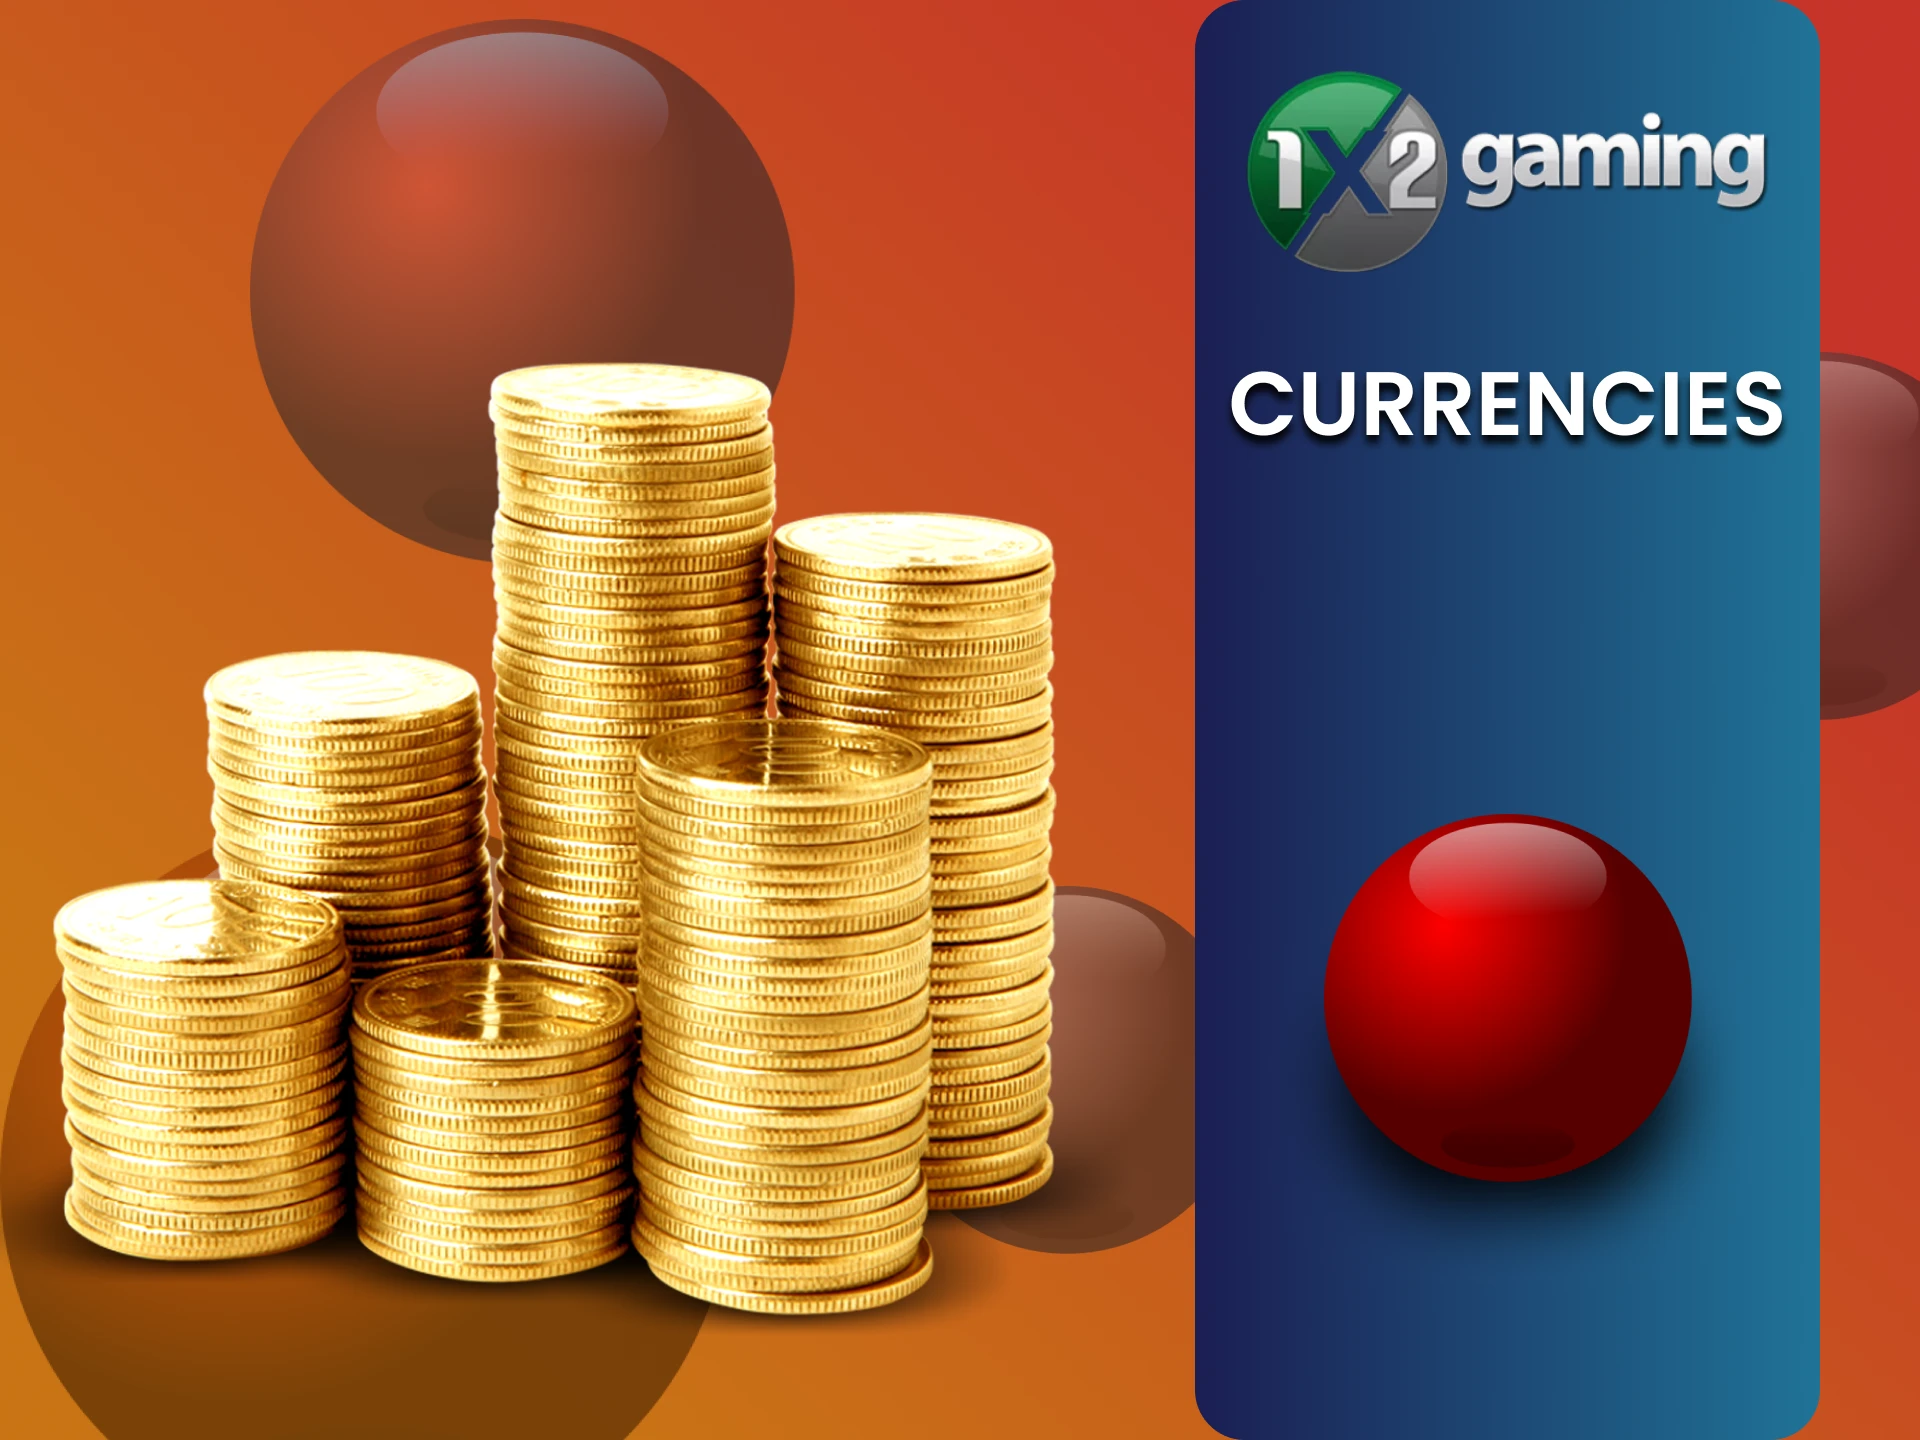 We will tell you what currencies are used in games from 1x2 gaming.